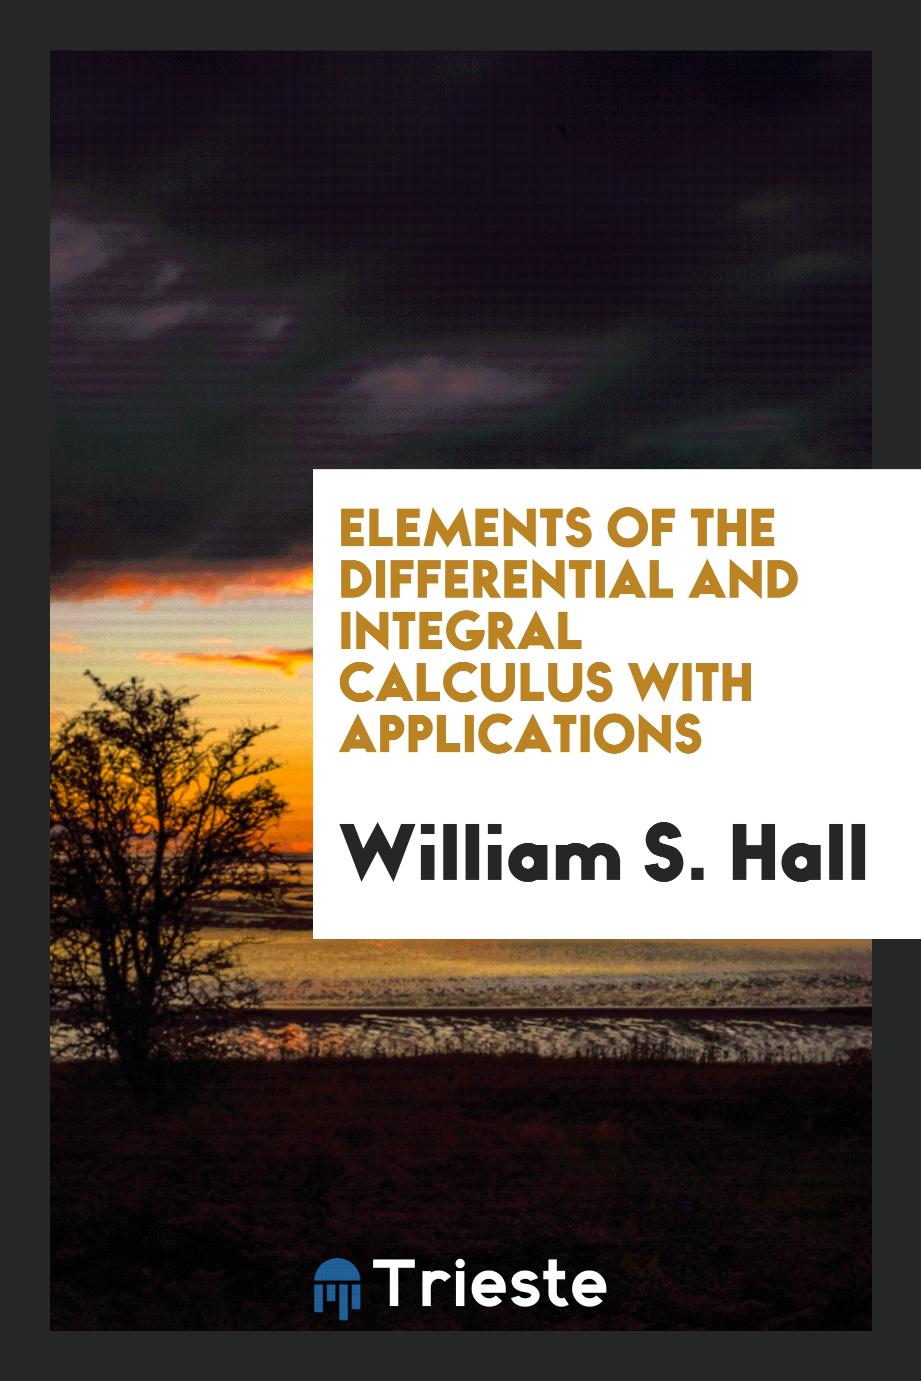 Elements of the differential and integral calculus with applications